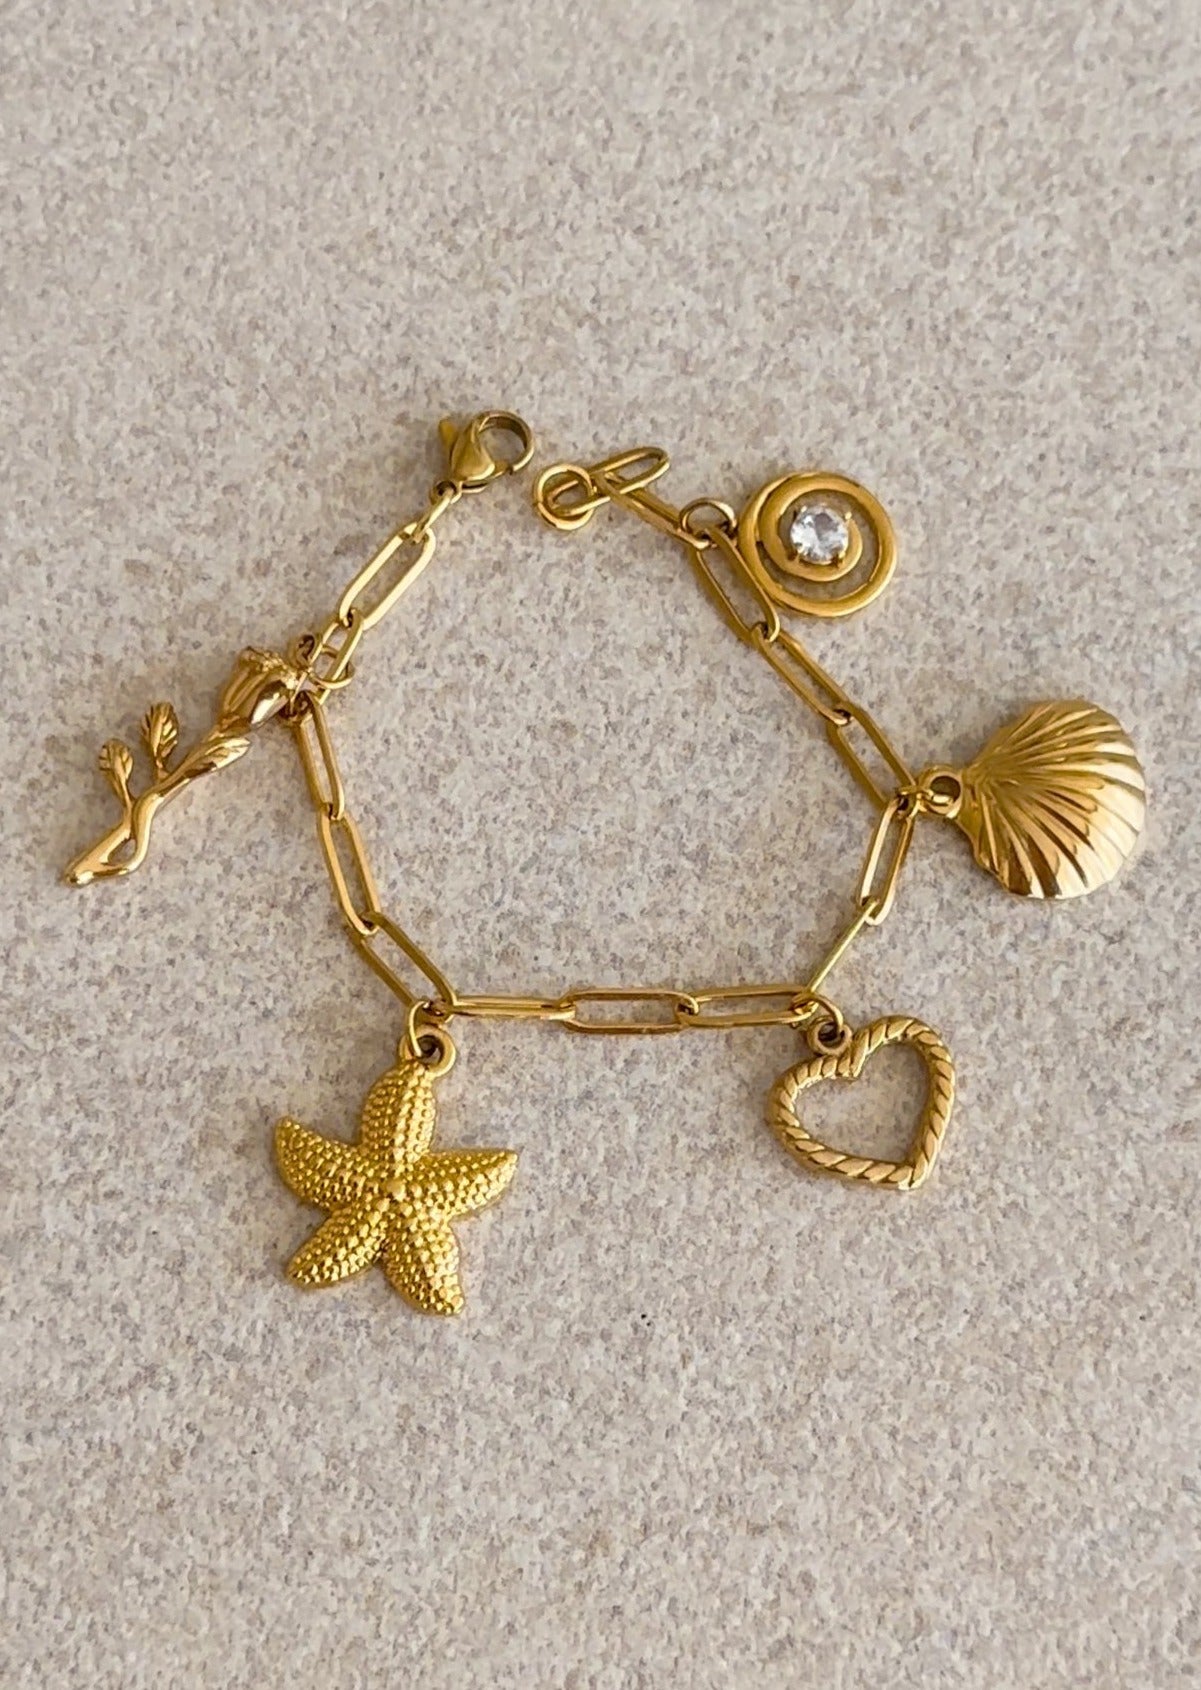 Bespoke Gold Charms